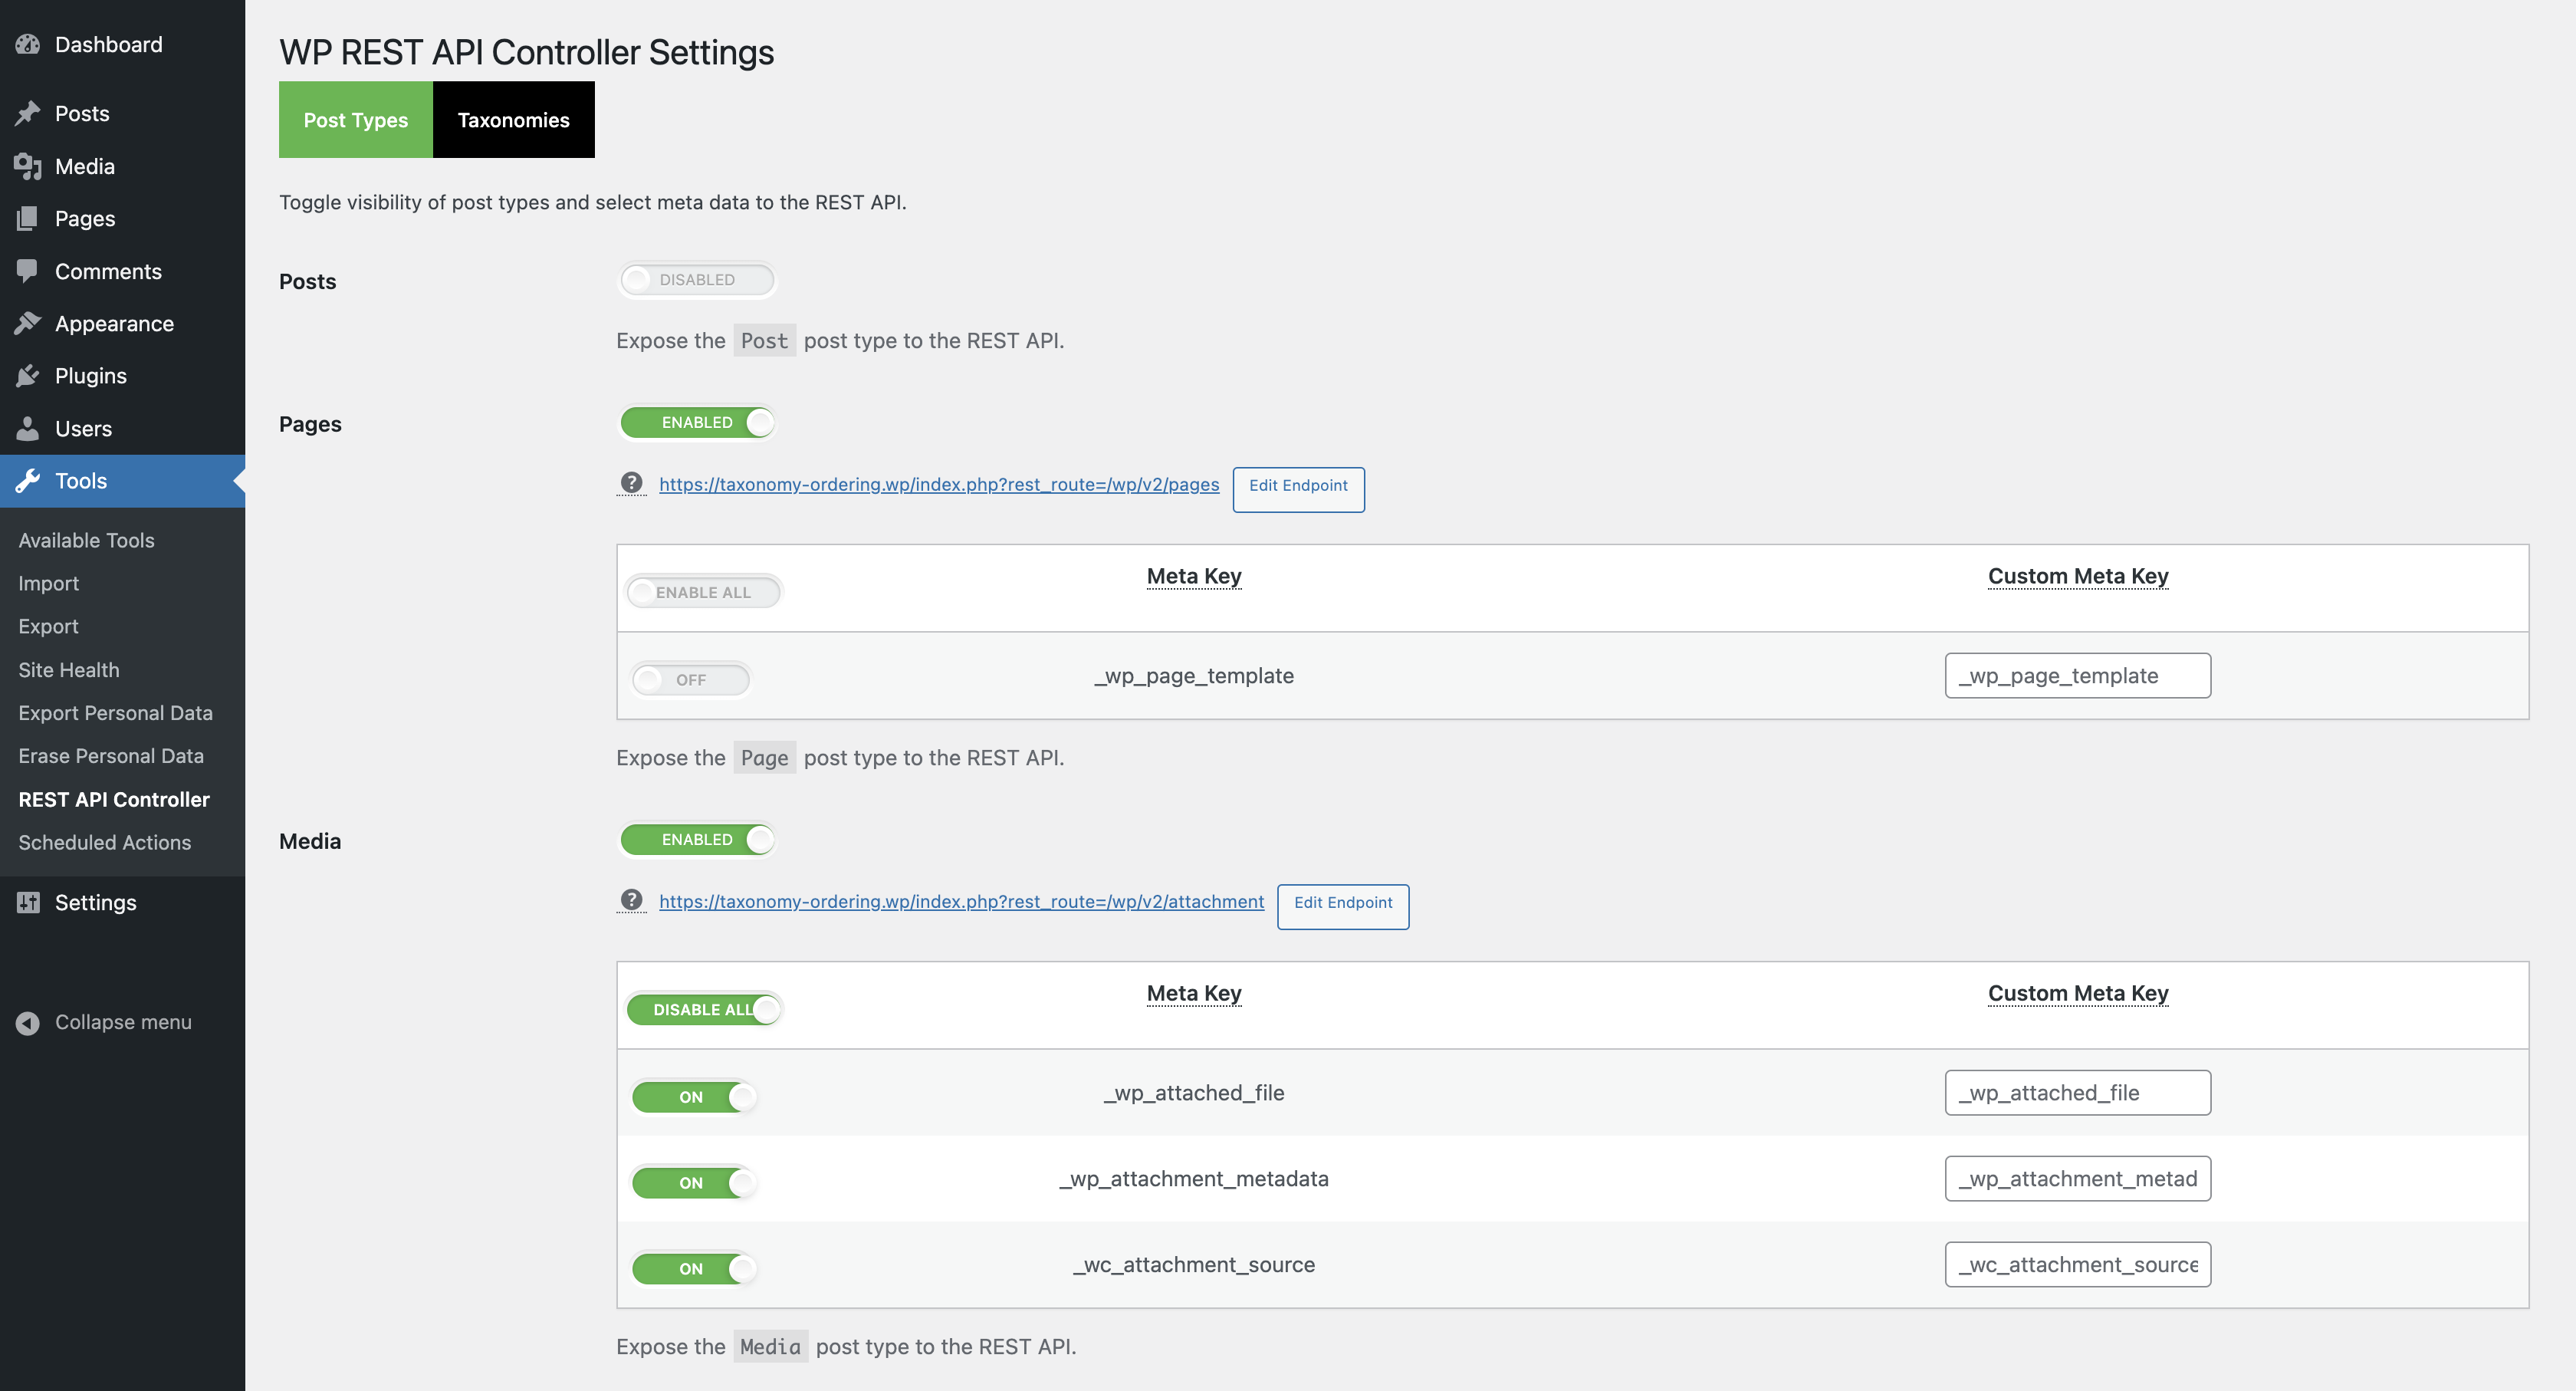 WP REST API Controller settings page.